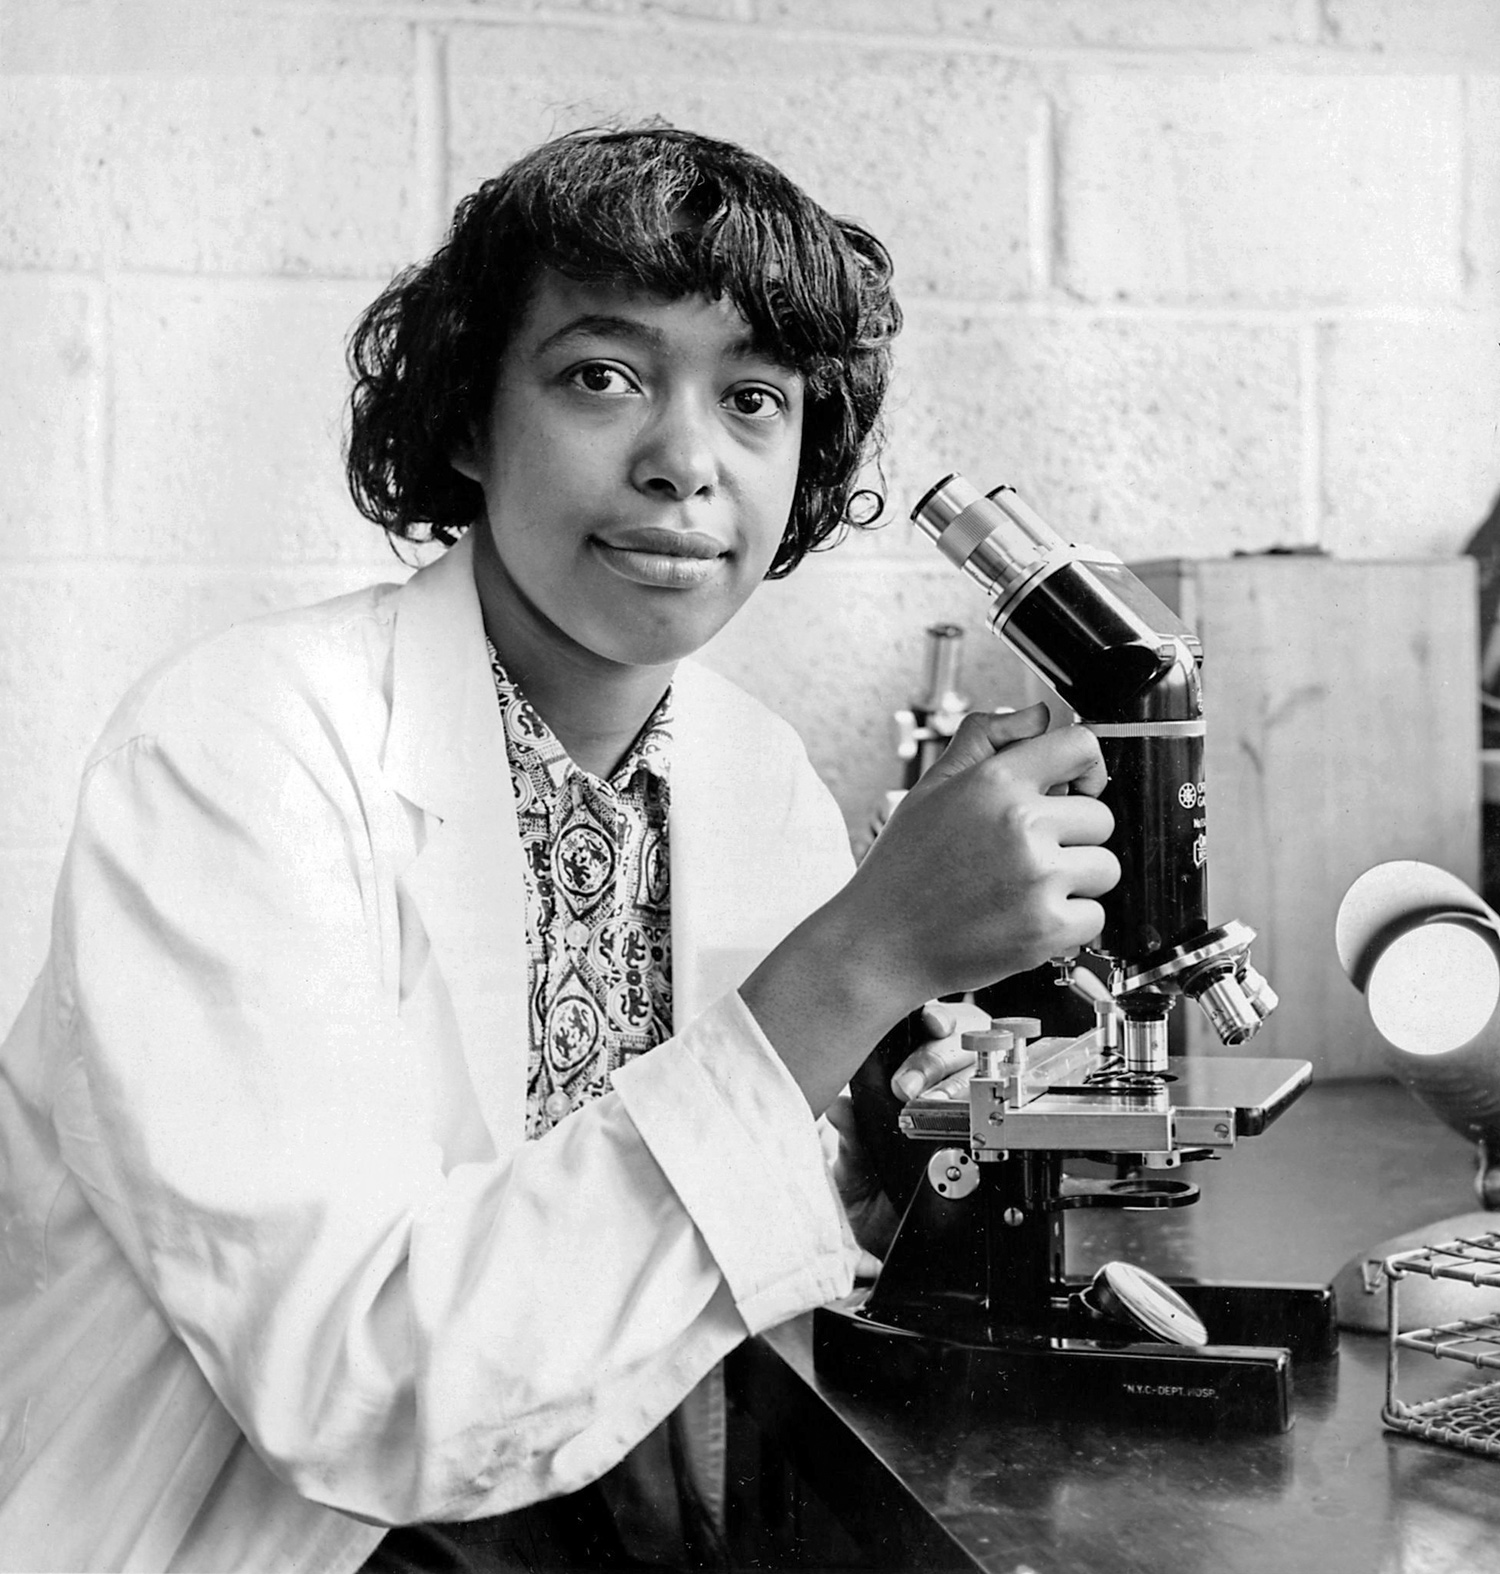 A teenager, the future Dr. Patricia Bath adjusts a microscope and looks into the camera. 